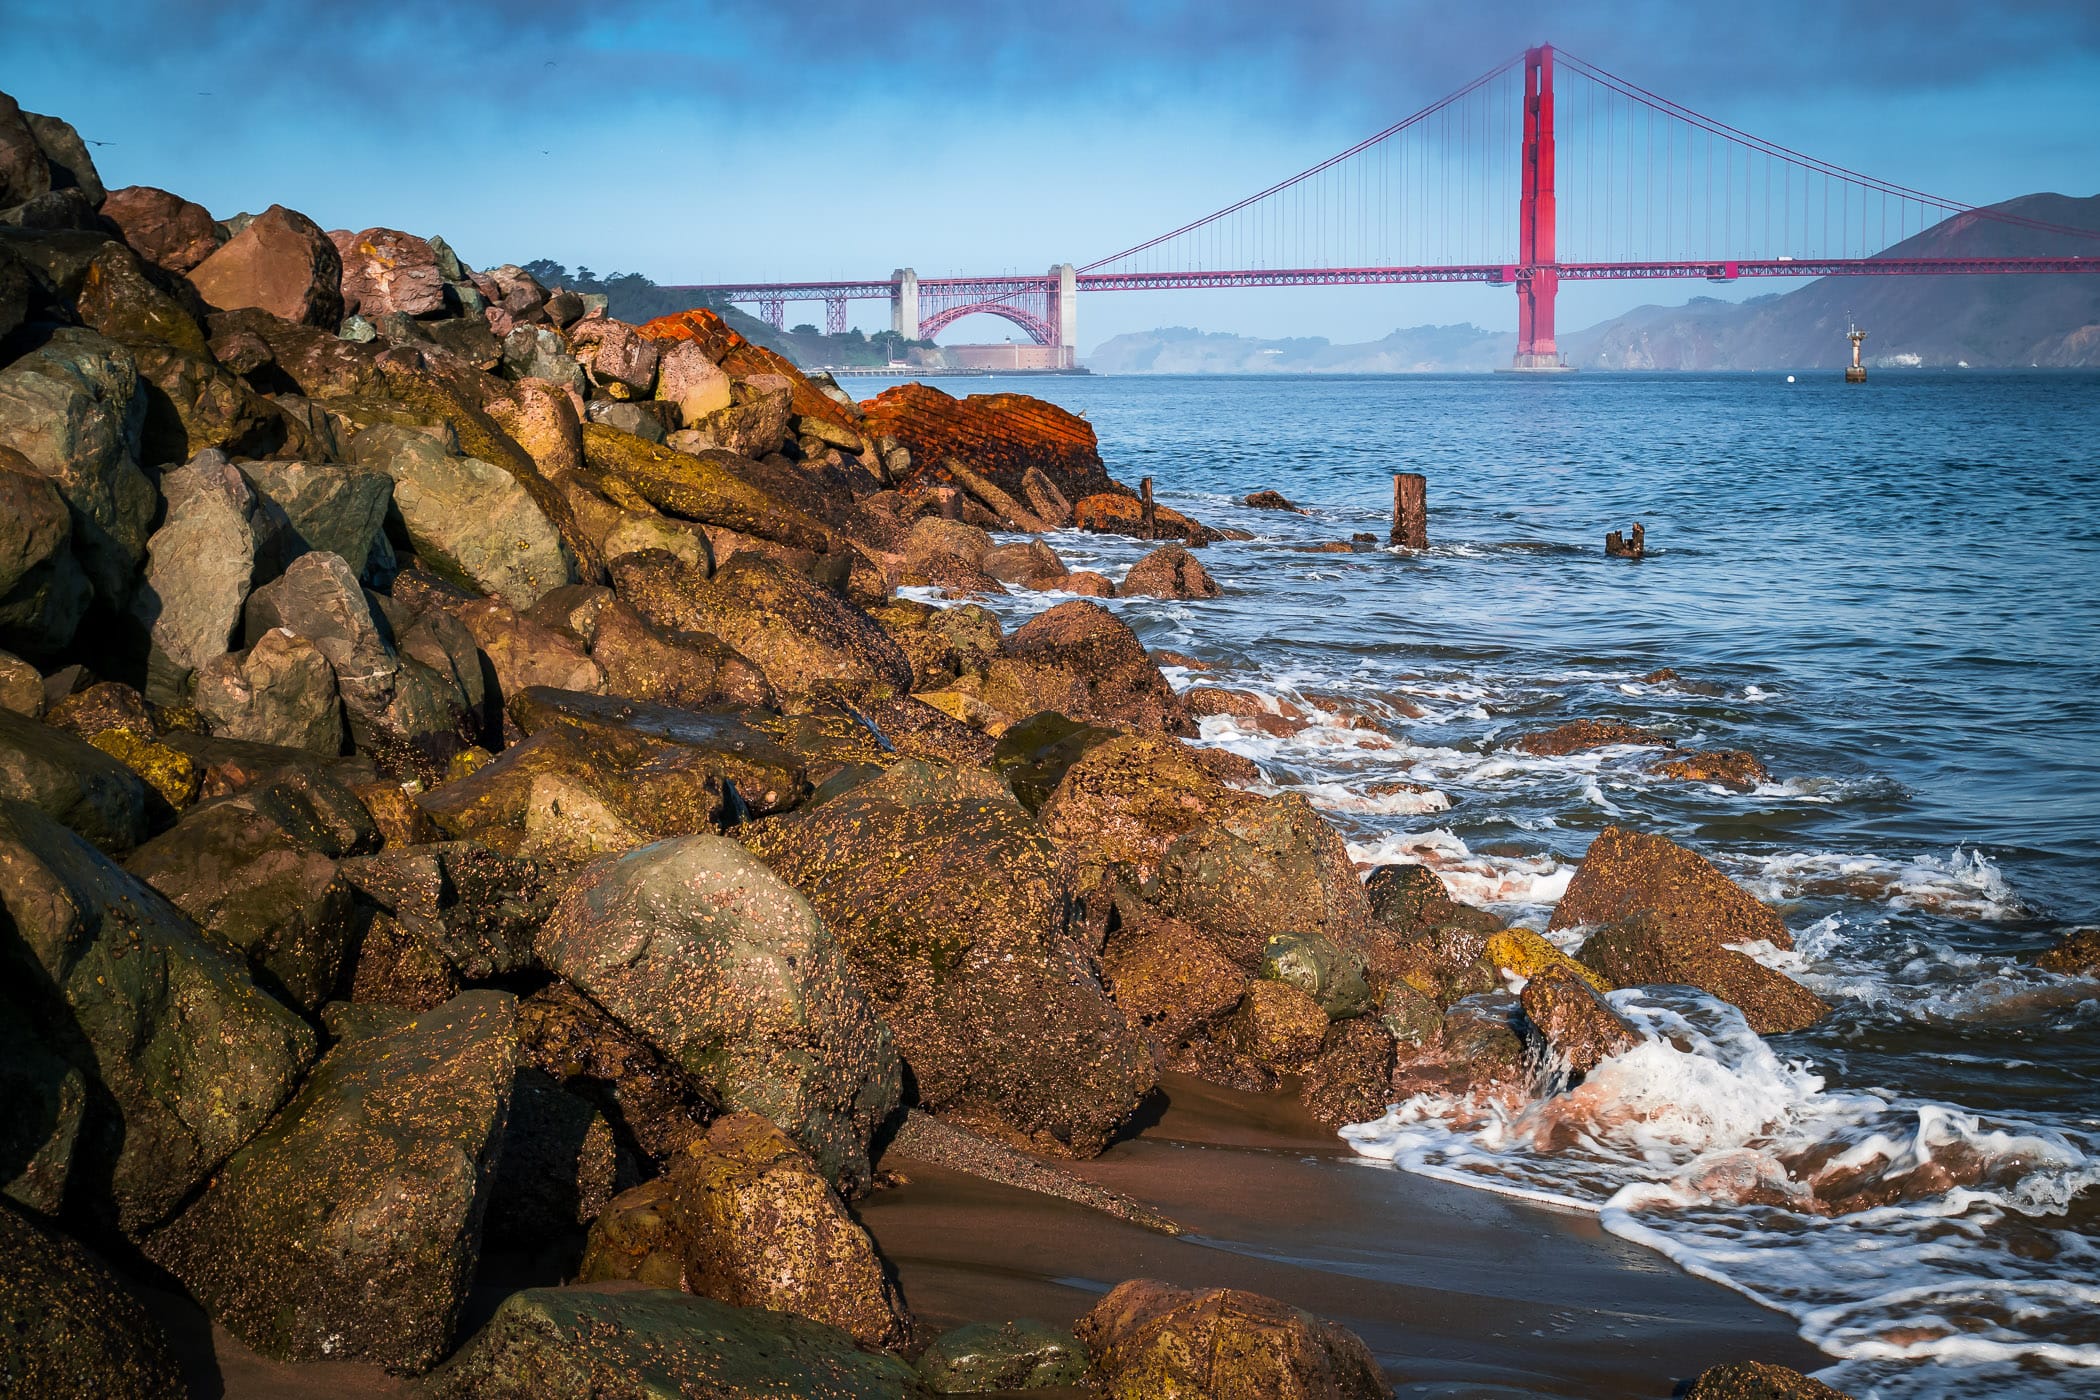 The San Francisco Bay surf laps at rocks on the beach at Crissy Field as the Golden Gate Bridge rises in the distance.